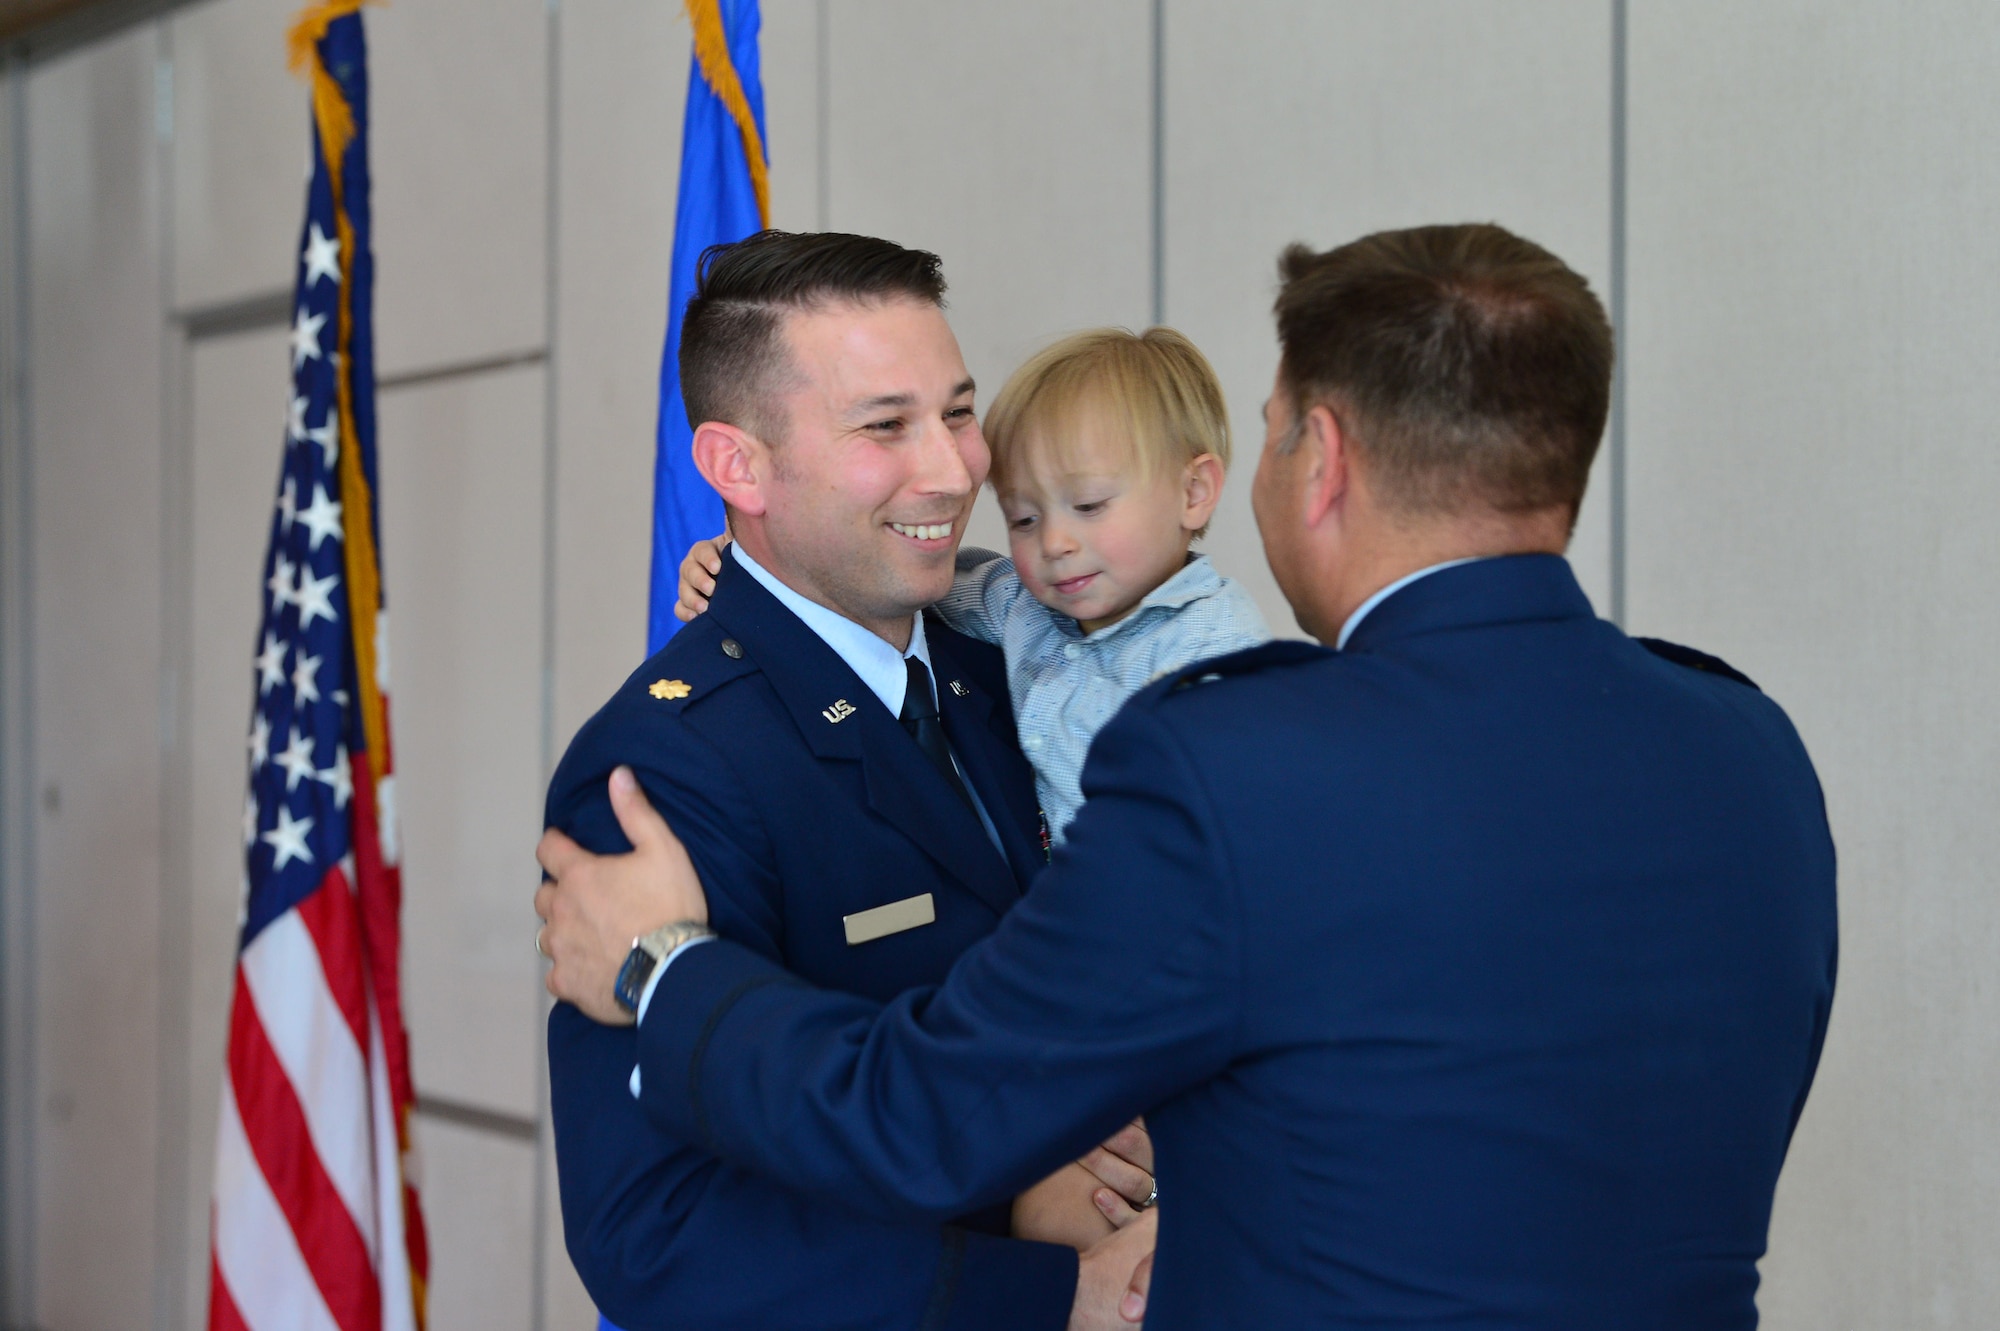 Maj. Phillip, 732nd Operations Group chief of intelligence, thanks Lt. Col. Daniel Finkelstein, presiding officer of Maj. Phillip’s promotion ceremony March 31, 2018, in Las Vegas. Phillip expressed his family’s excitement for their continued growth and the opportunity to lead future Airmen. (U.S. Air Force photo by Airman 1st Class Haley Stevens)